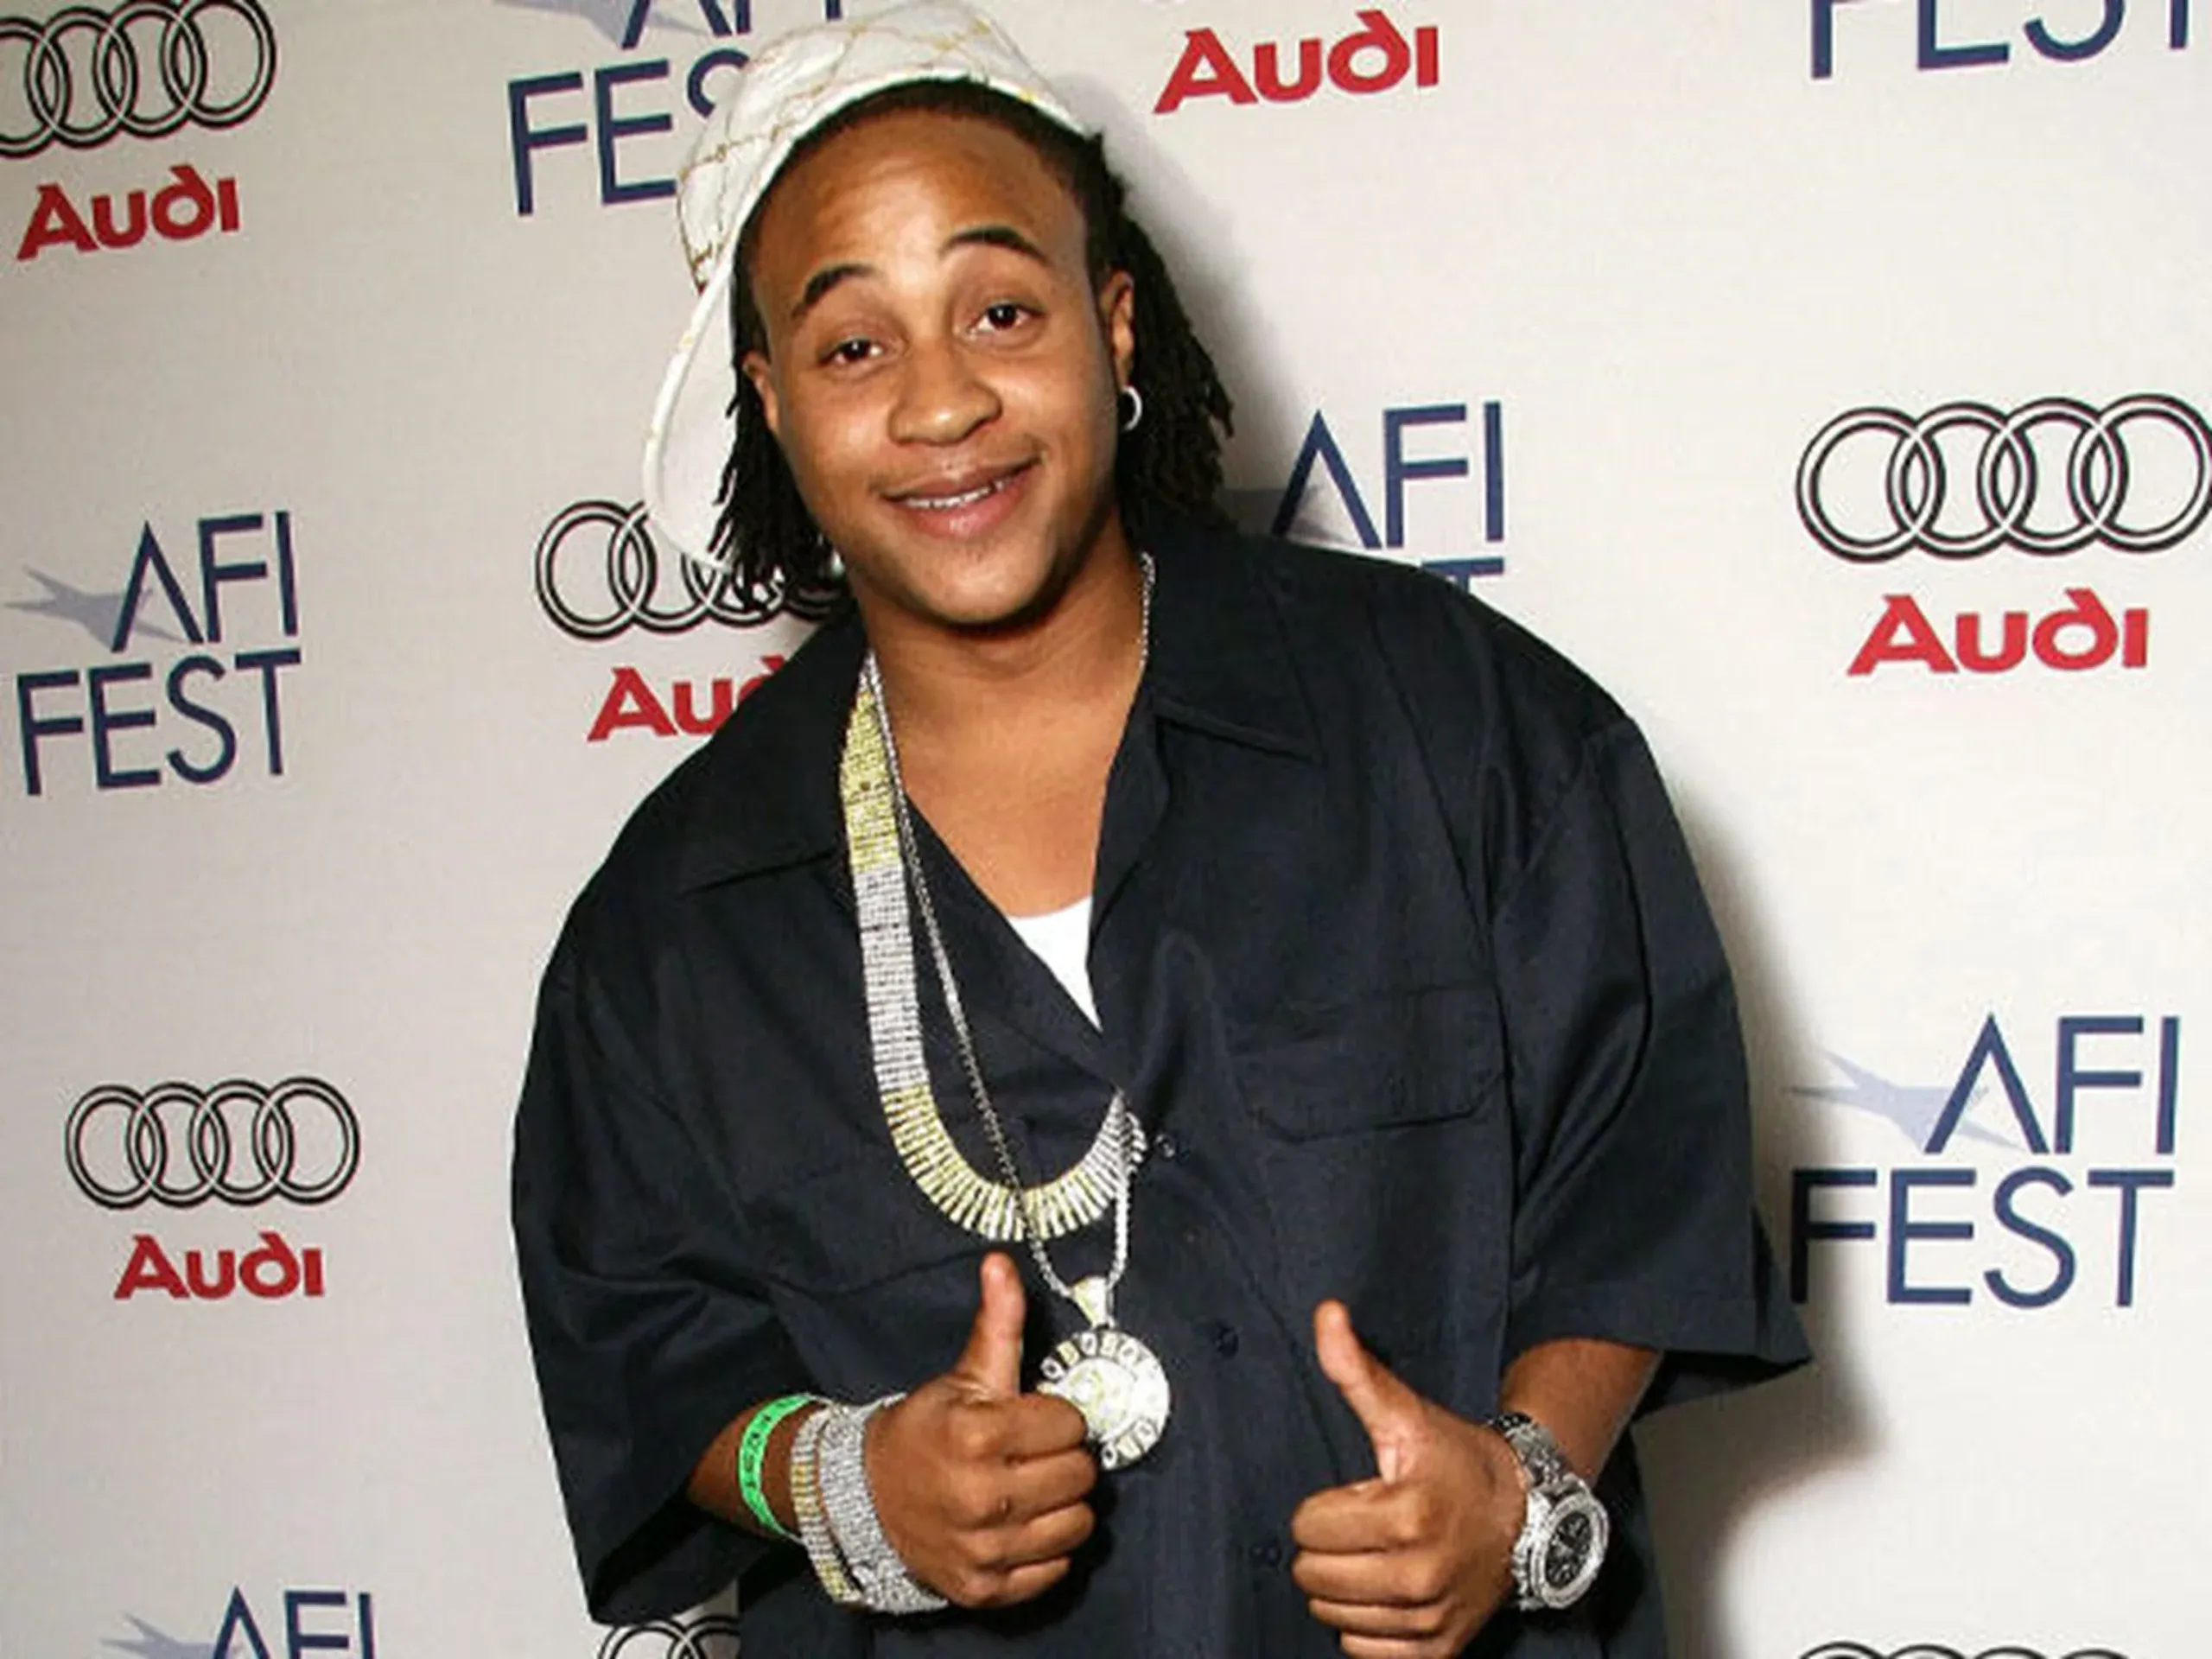 Orlando Brown Height, Weight & Appearance